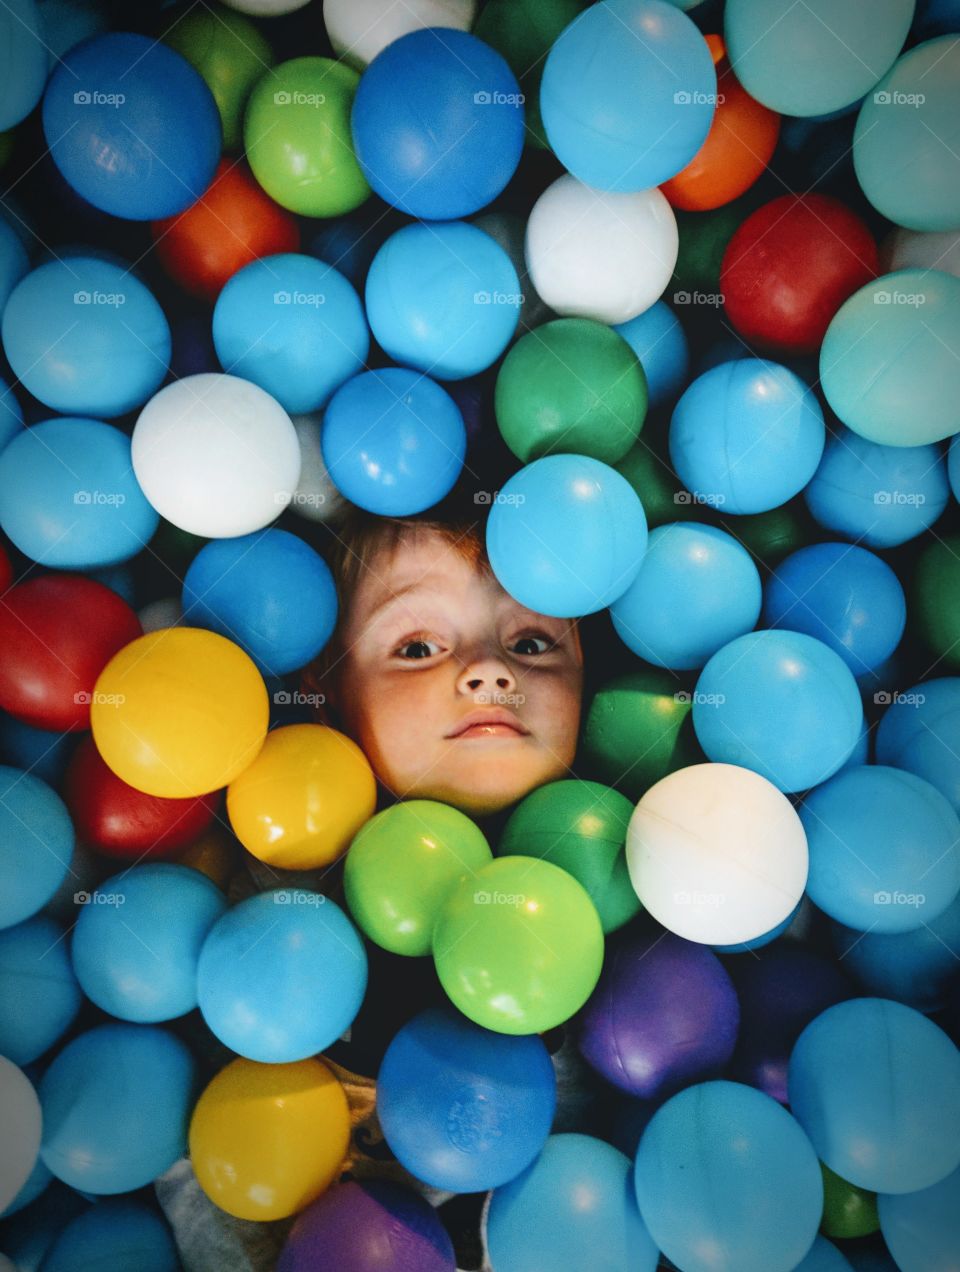 Boy playing hide and seek in a ball pit/ball pool